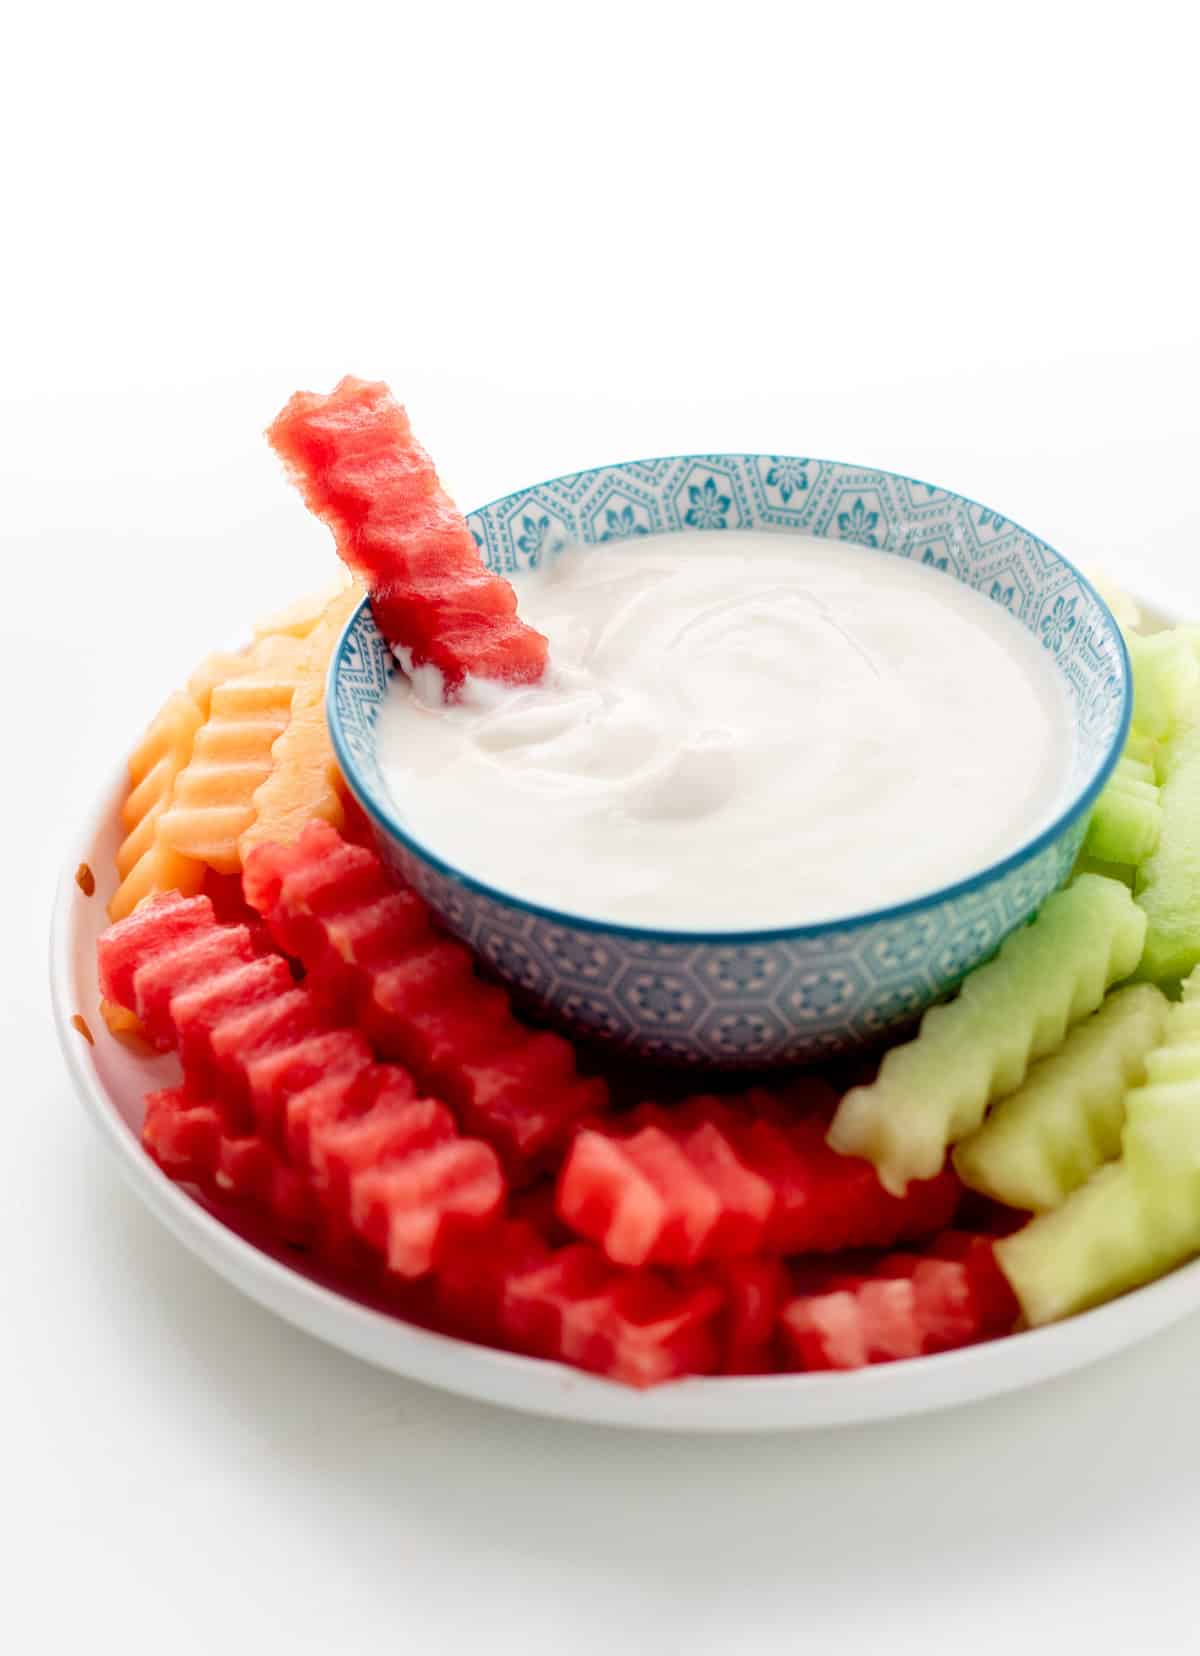 A plate of fruit fries with someone dipping a watermelon fry into the yogurt dip in the middle of the plate.